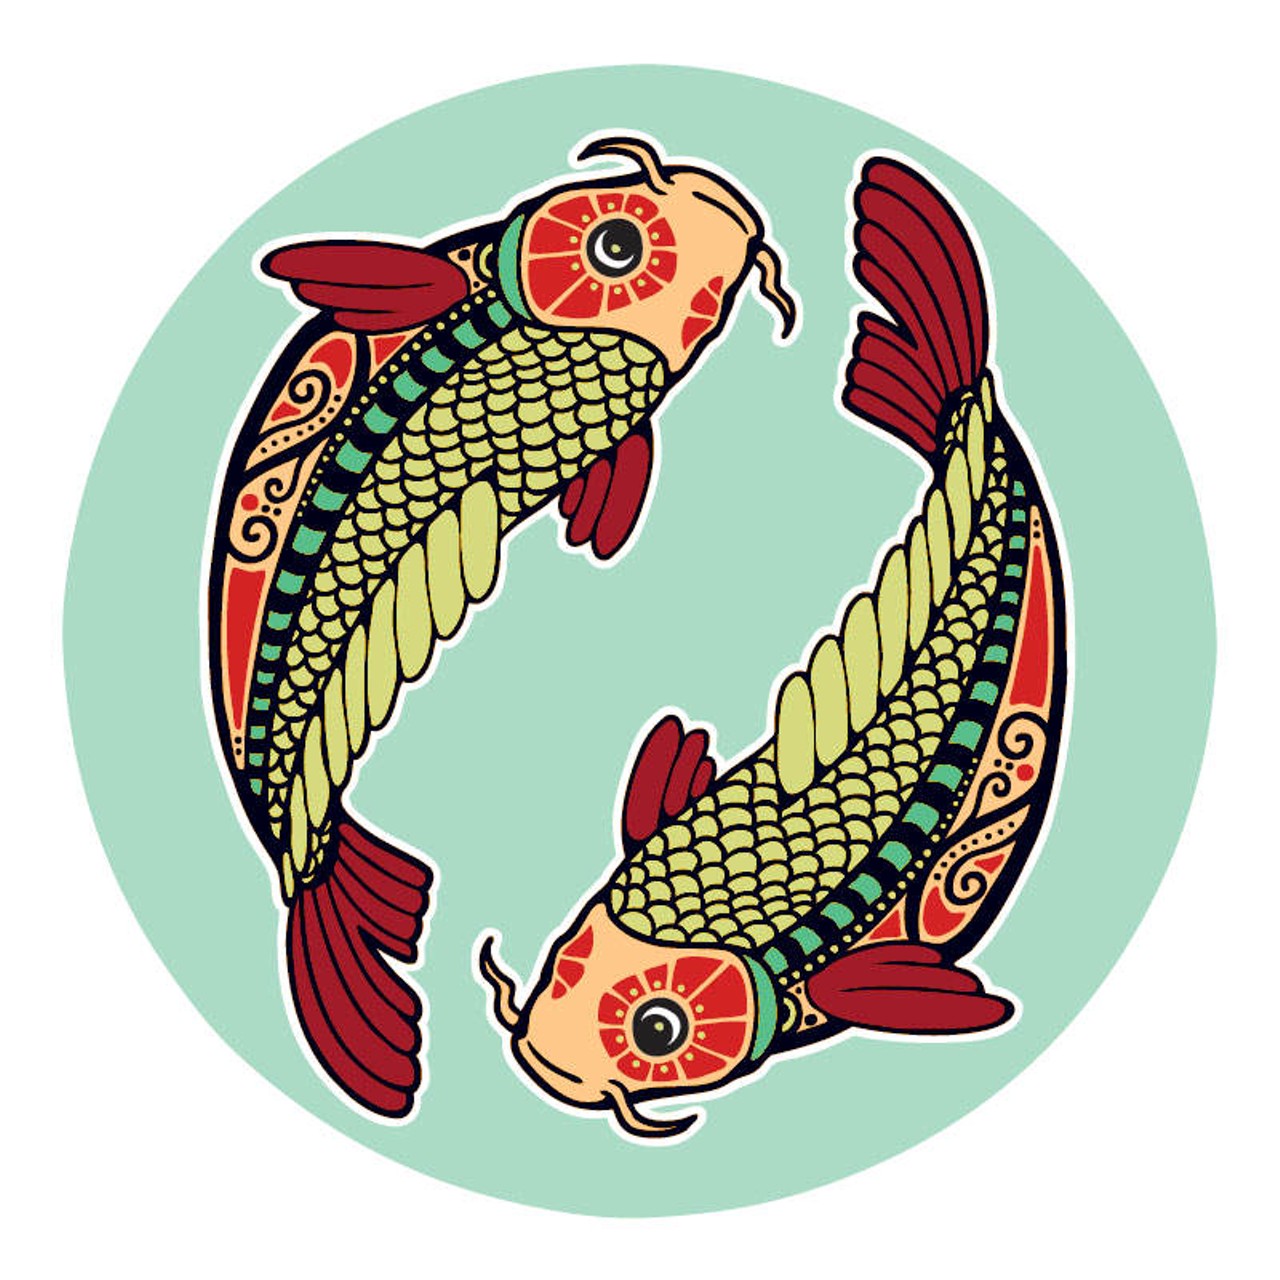 PISCES (Feb. 21-March 20): 
You have mixed feelings that are getting easy to dismiss in the face of what you don&#146;t want to see or hear. This ambivalence came about when someone decided to go their own way or when you caught on to forms of deception that made you wonder who you were really dealing with. At the moment you&#146;re OK with not paying attention to the signs. If at any point you find the strength to get real about this, you will have no choice but to rearrange your perspective and your priorities. Don&#146;t postpone this. The longer you put it off, the more complicated things will get.